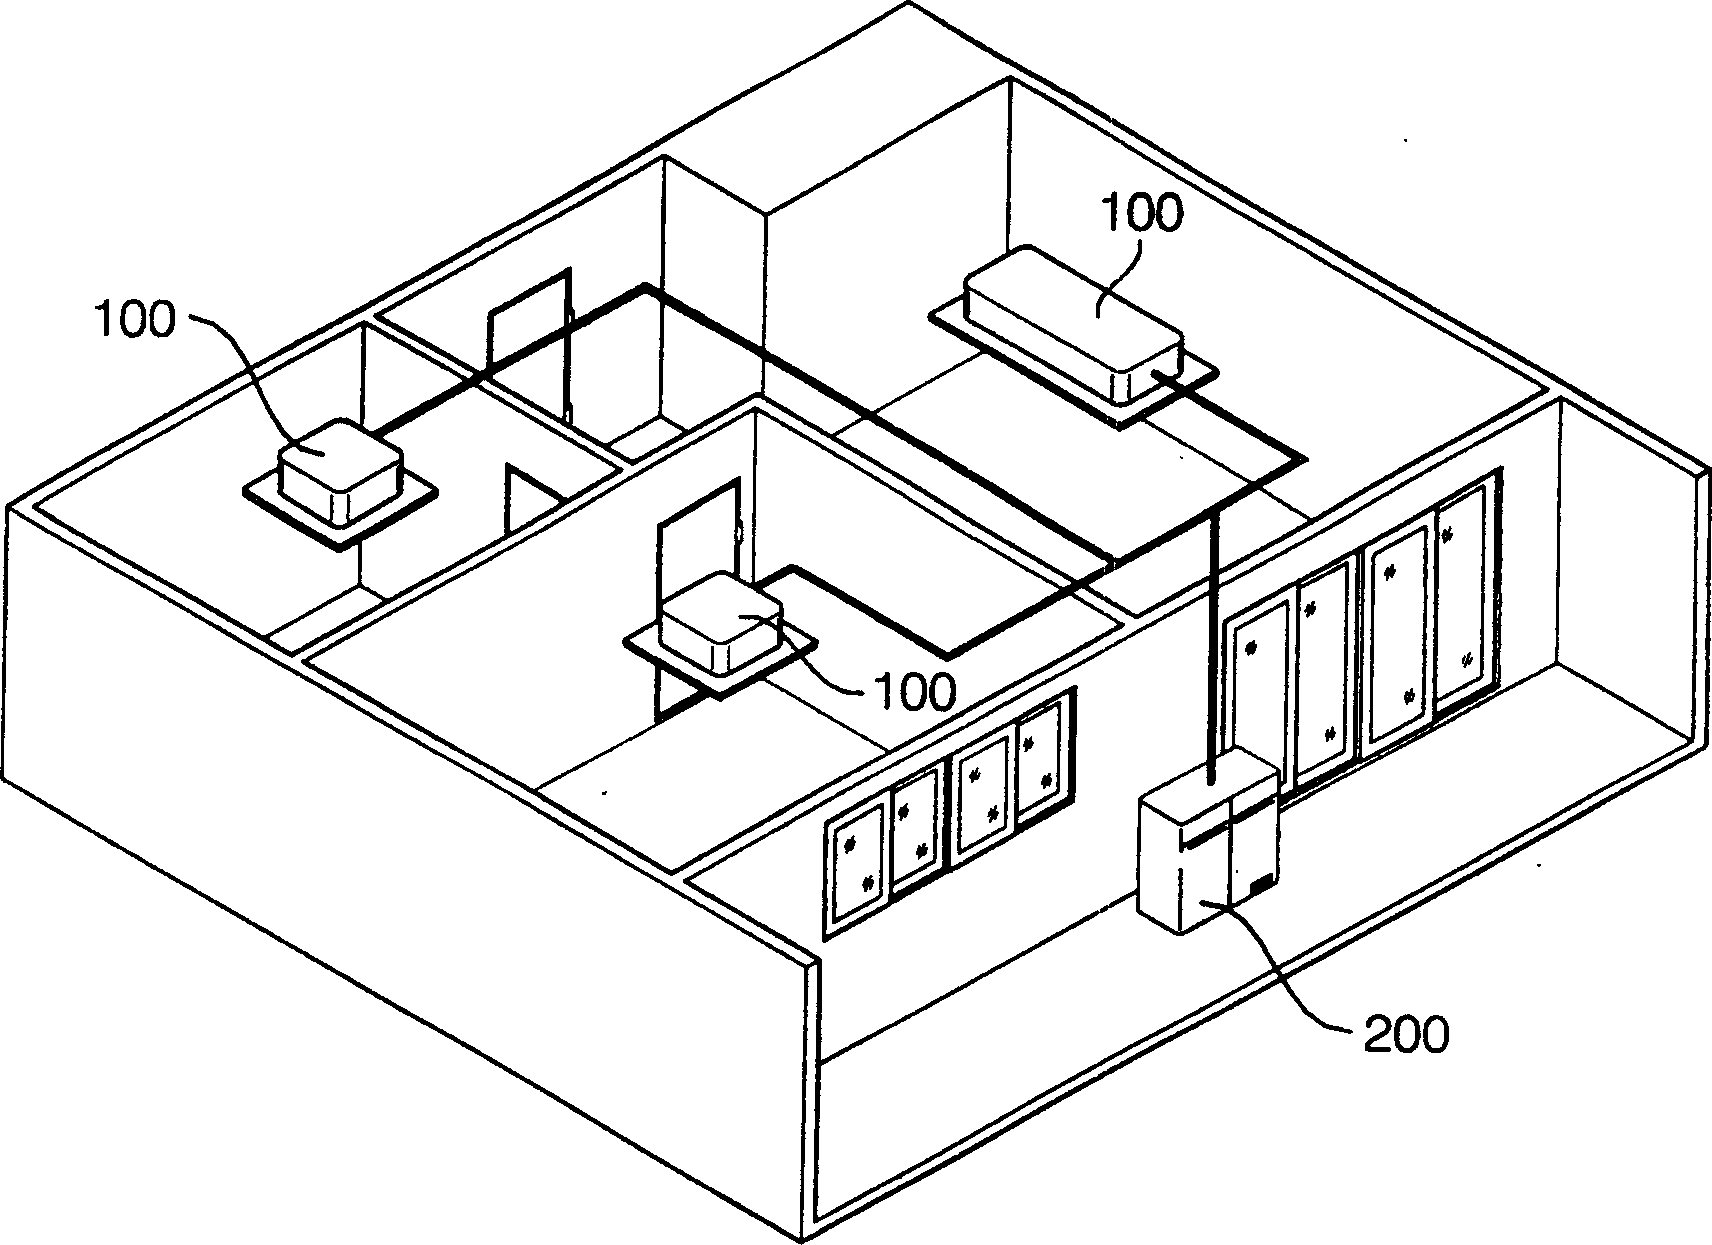 Air conditioning system with plural indoor units and its operation